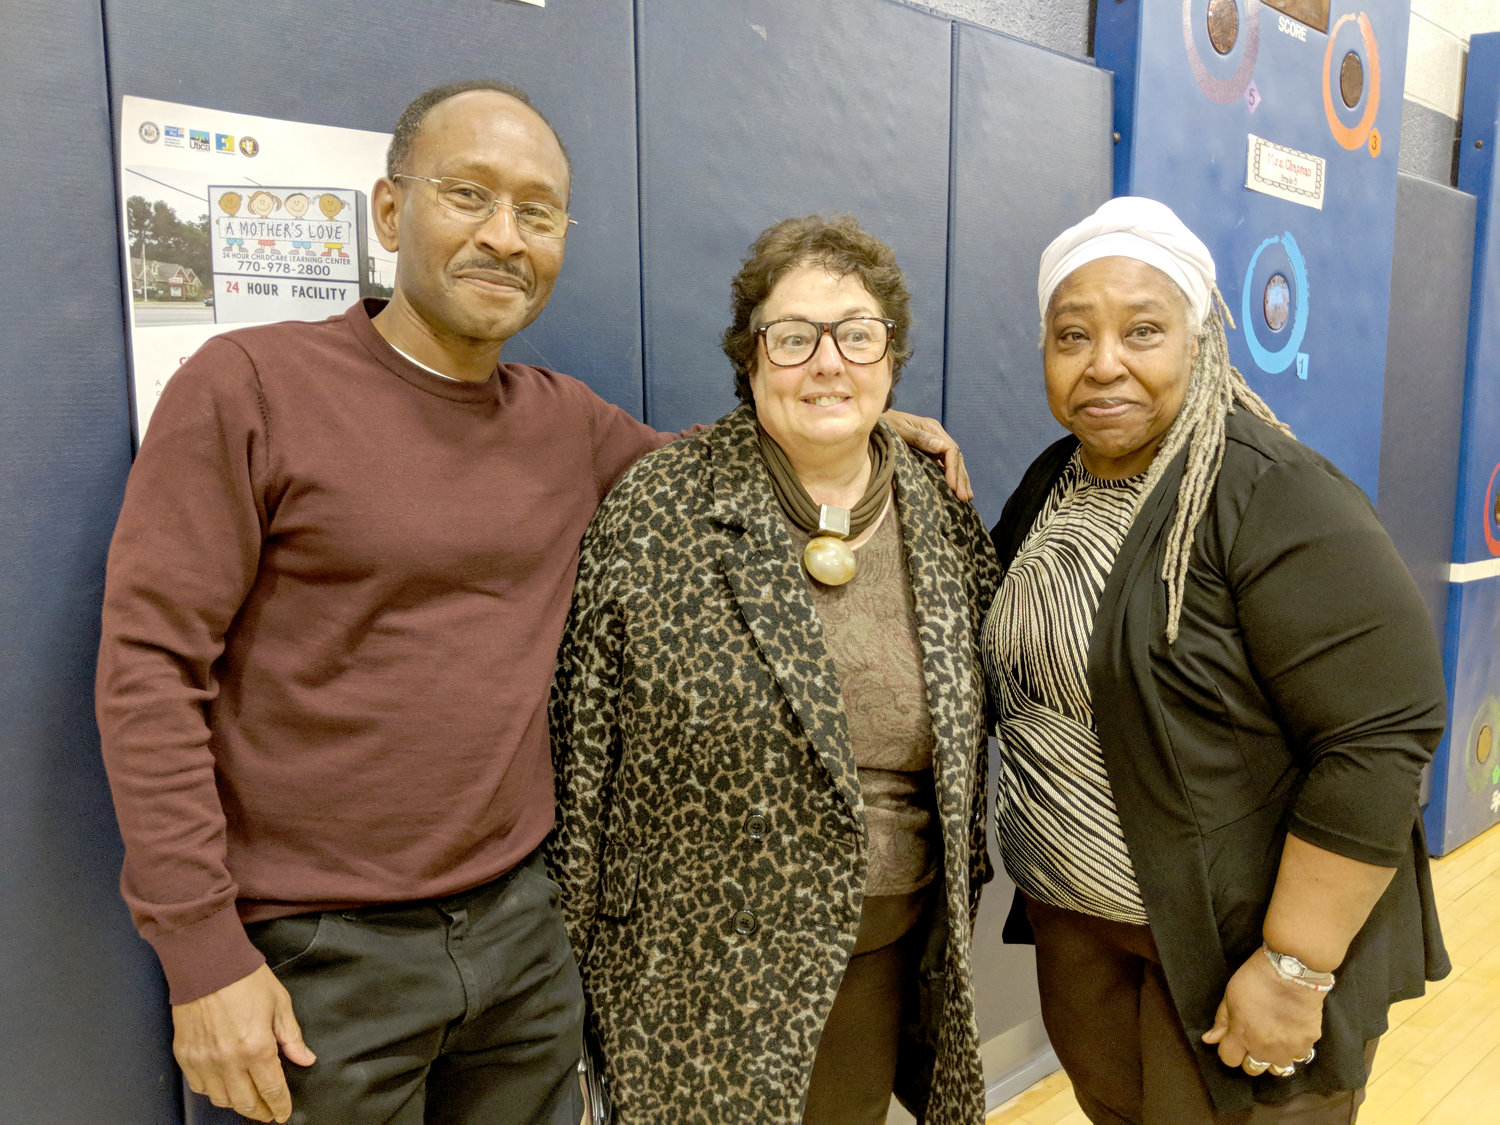 Former Cornhill  Councilwoman Freddie Hamilton, who was a frequent  collaborator with Patrick Johnson and Rebuild the Village, was elected as the incoming President of Oneida County NAACP branch. Judge Anthony Garramone will be swearing in the branch leaders today (Thursday) at City Hall. Hamilton, right, is shown in this file photo with Johnson and former state Office of General Services Commissioner RoAnn Destito.